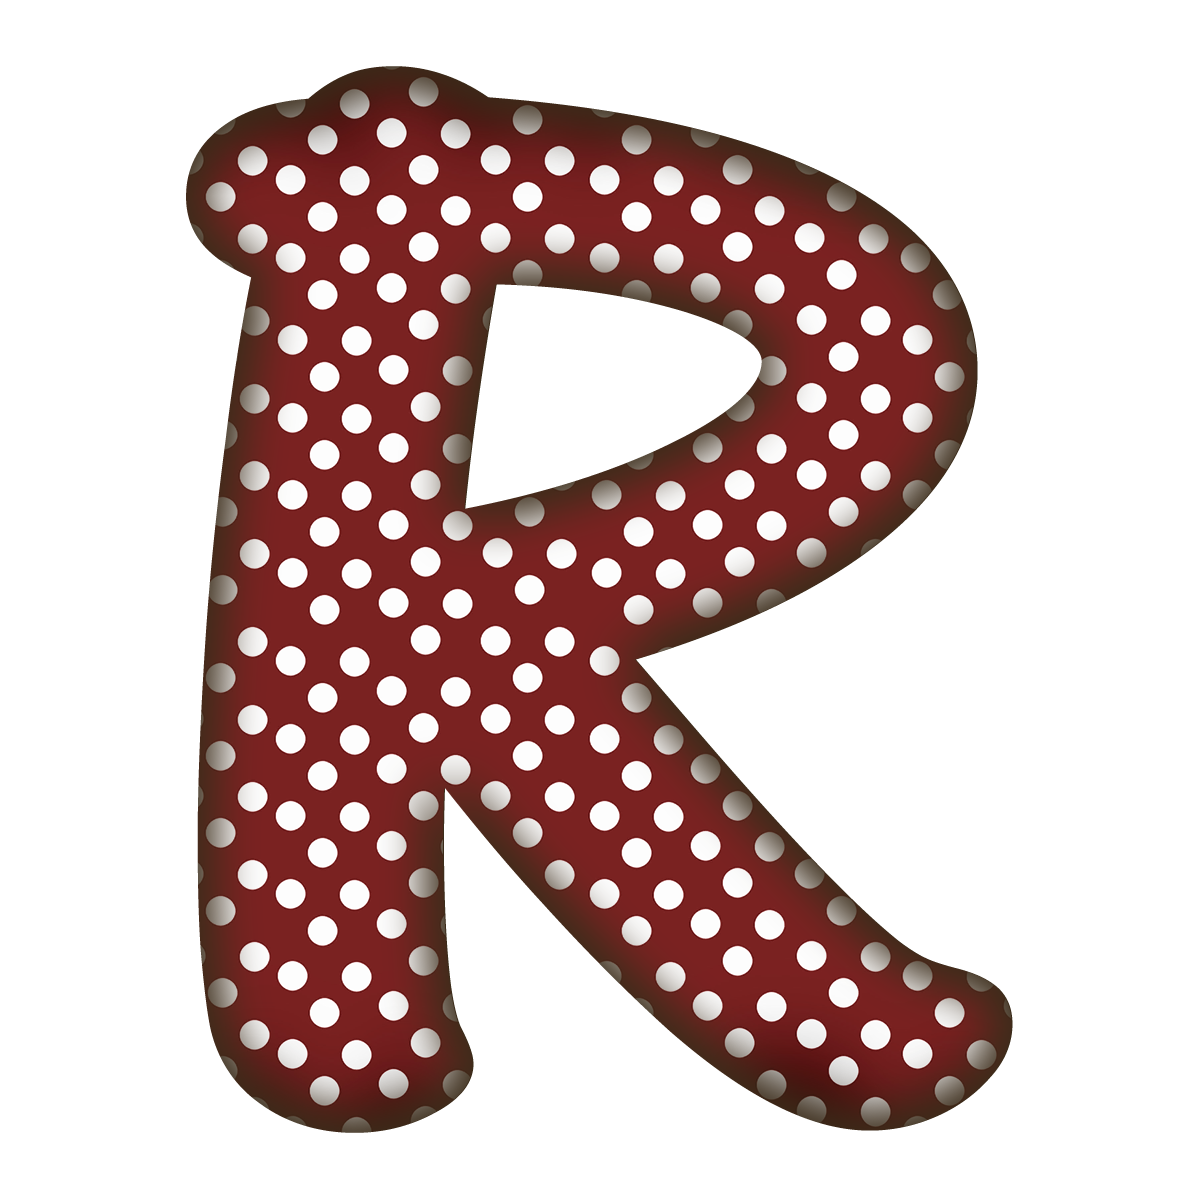 R Name Alphabet Images, Pictures, Symbols, Letters, Name Tag Images